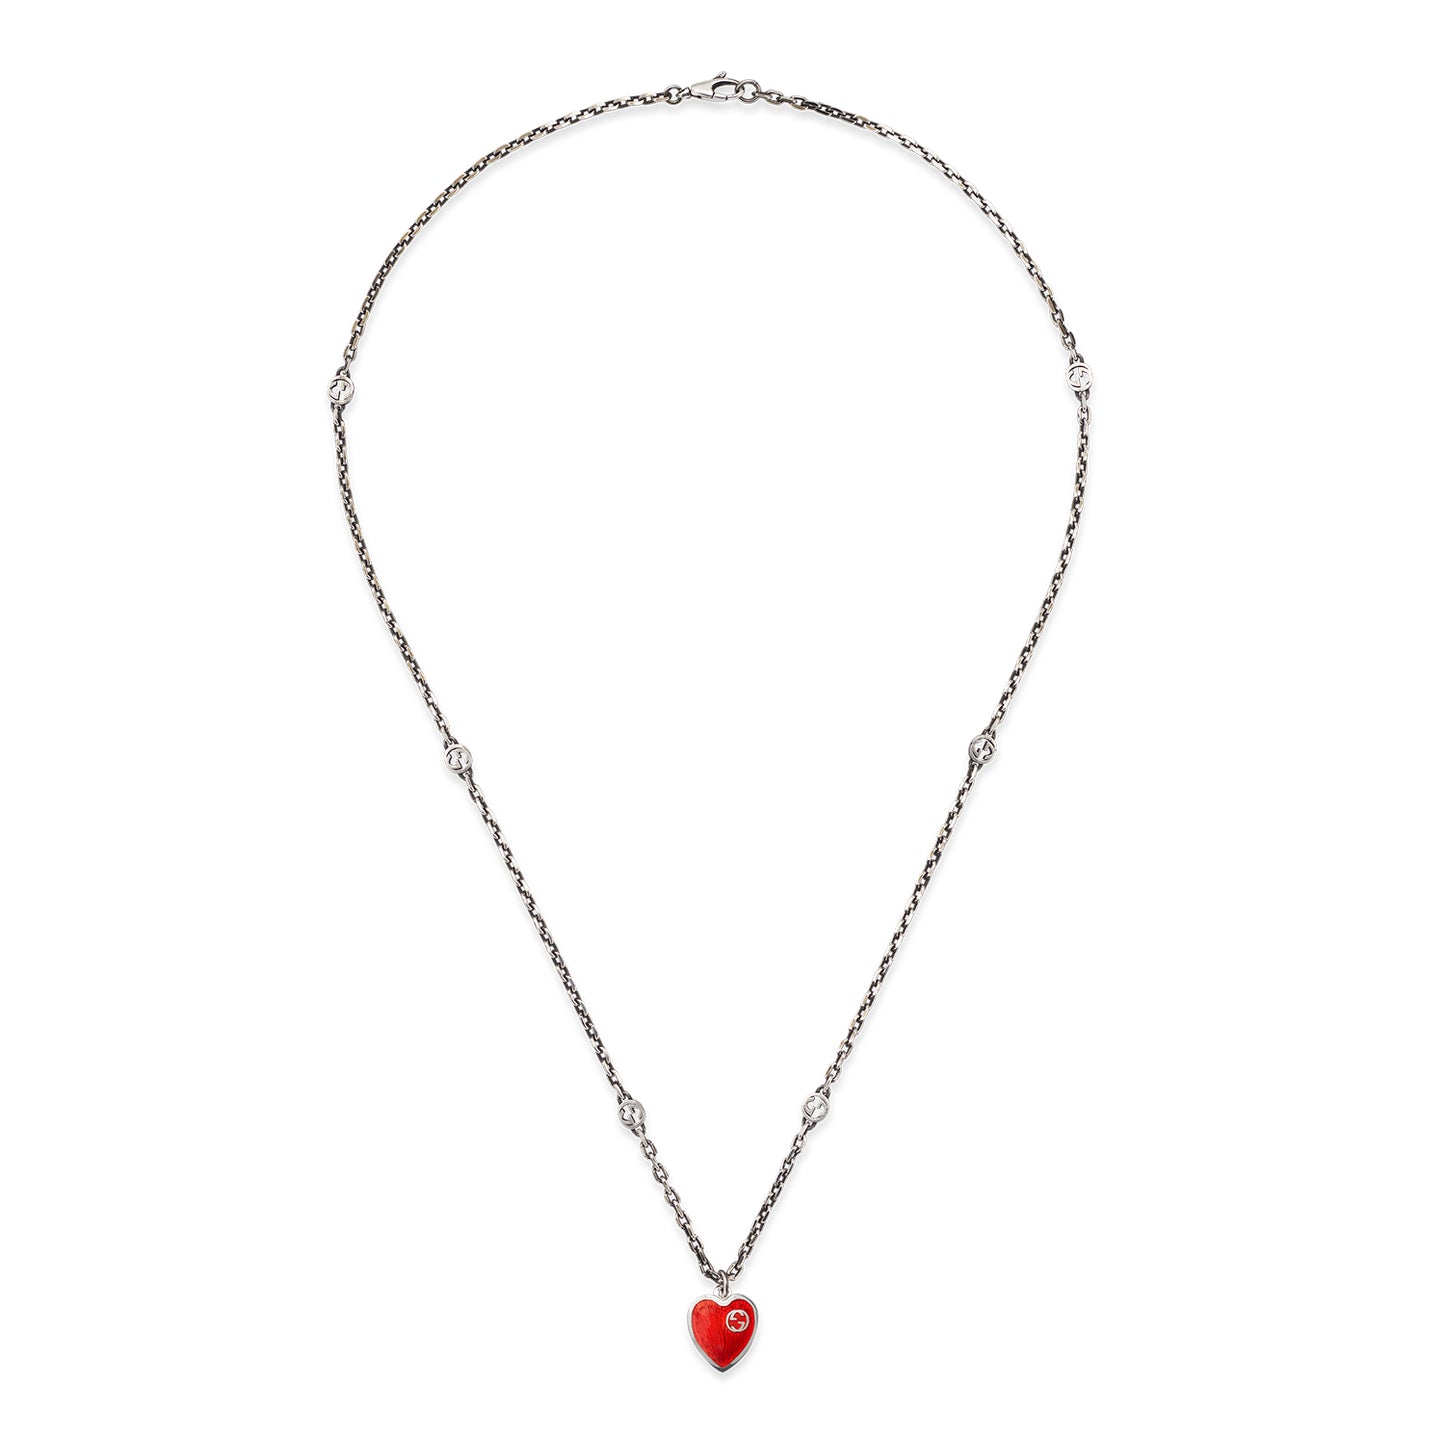 GUCCI HEART necklace